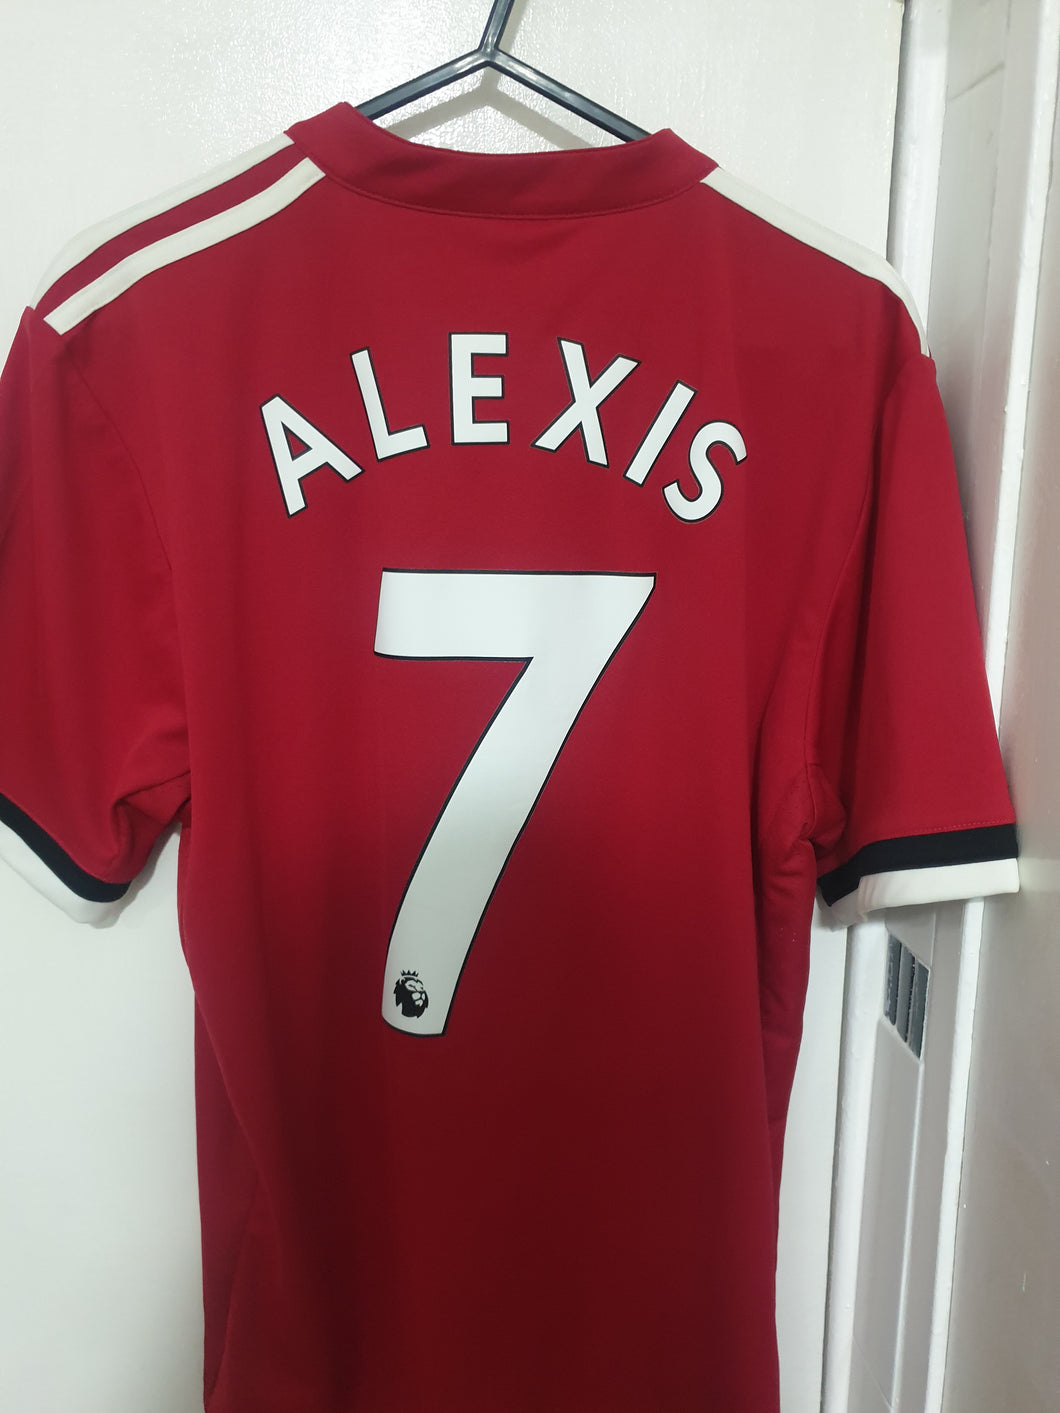 Manchester United 2017-18 Home Shirt Alexis7 (Size Small)